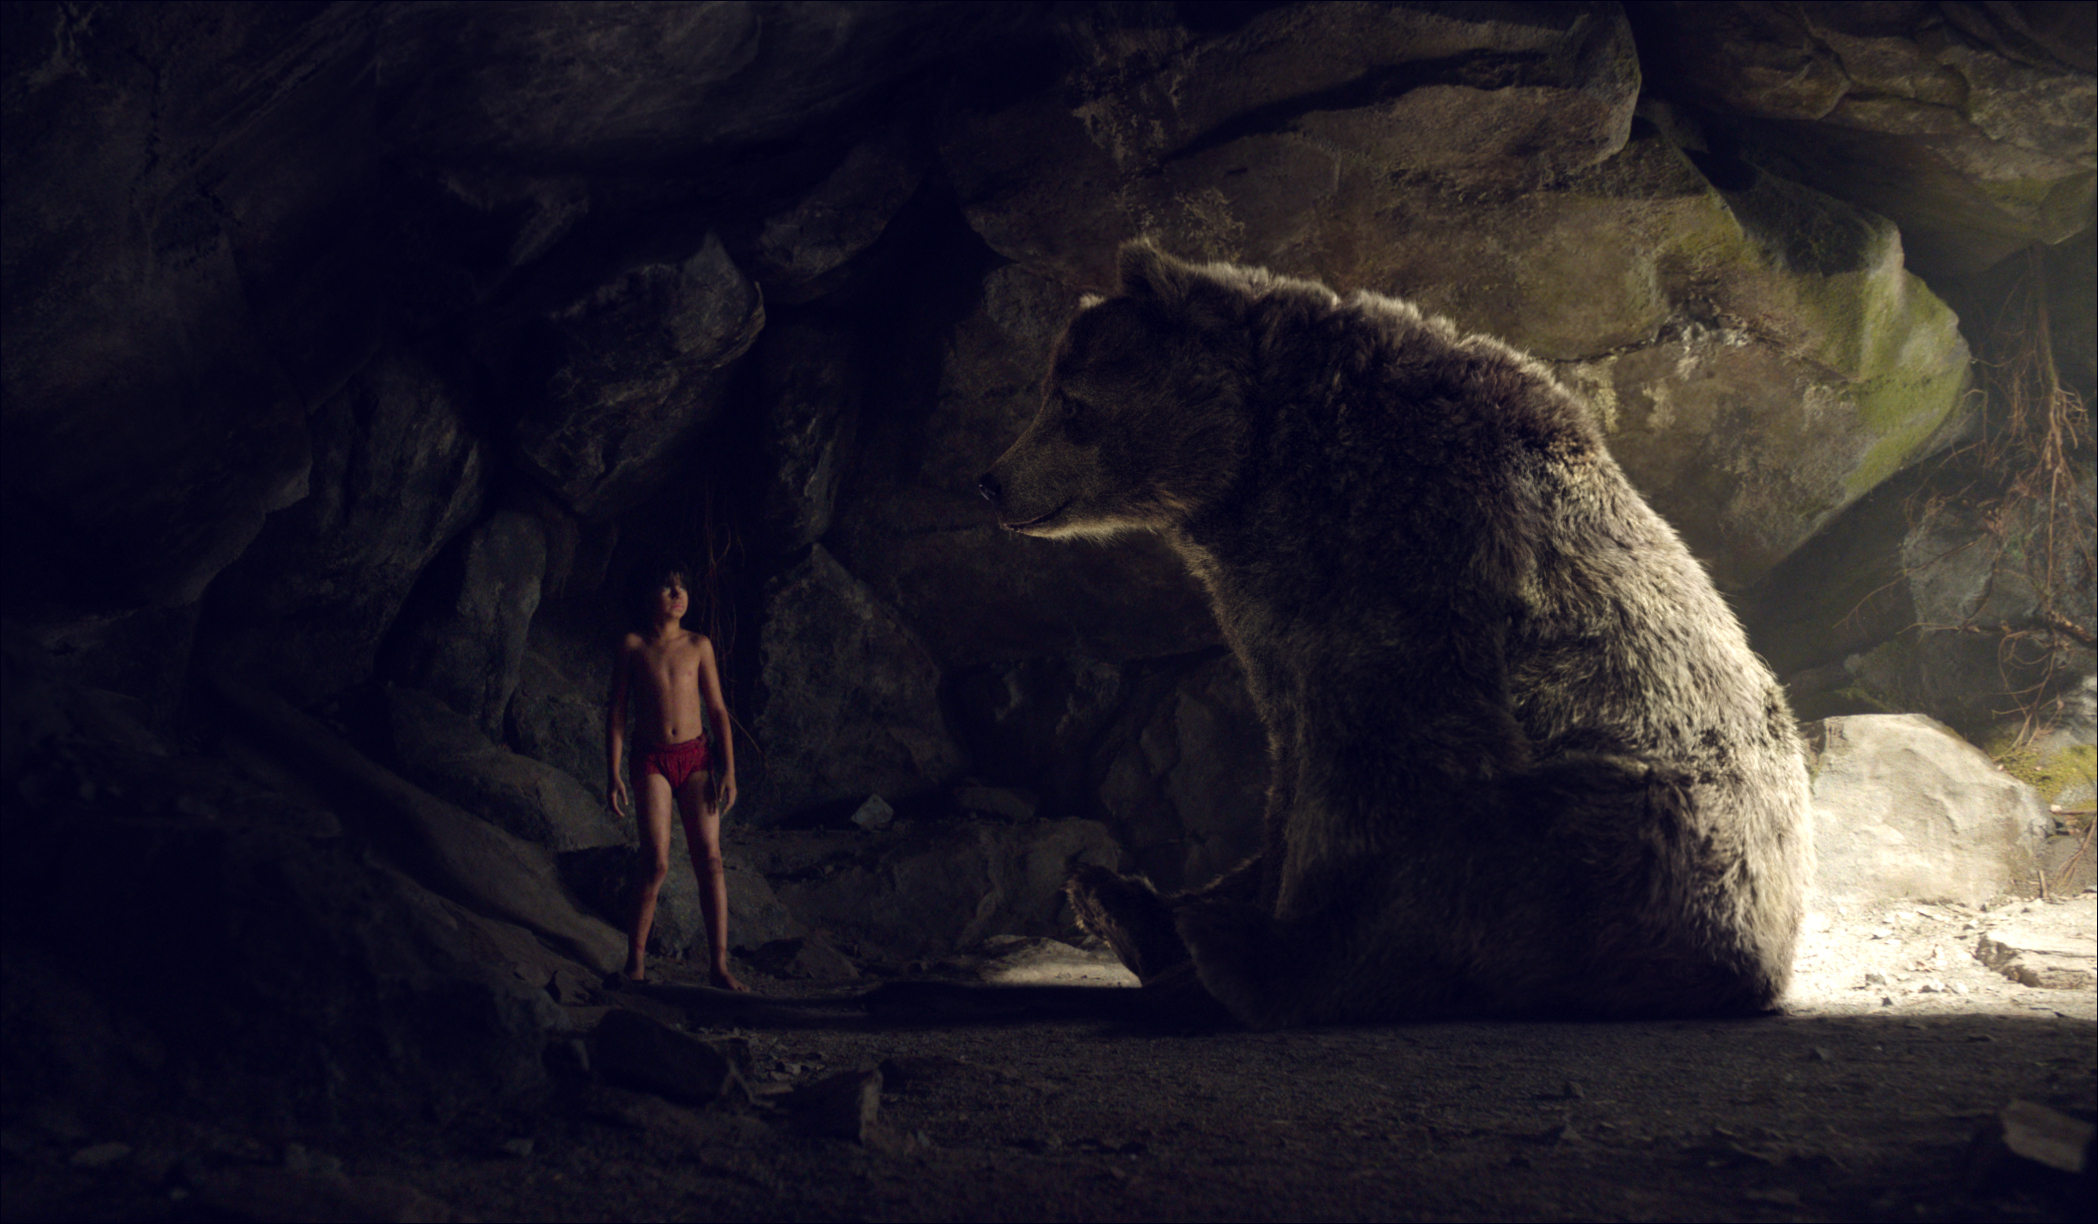 Movie The Jungle Book (2016) HD Wallpaper | Background Image